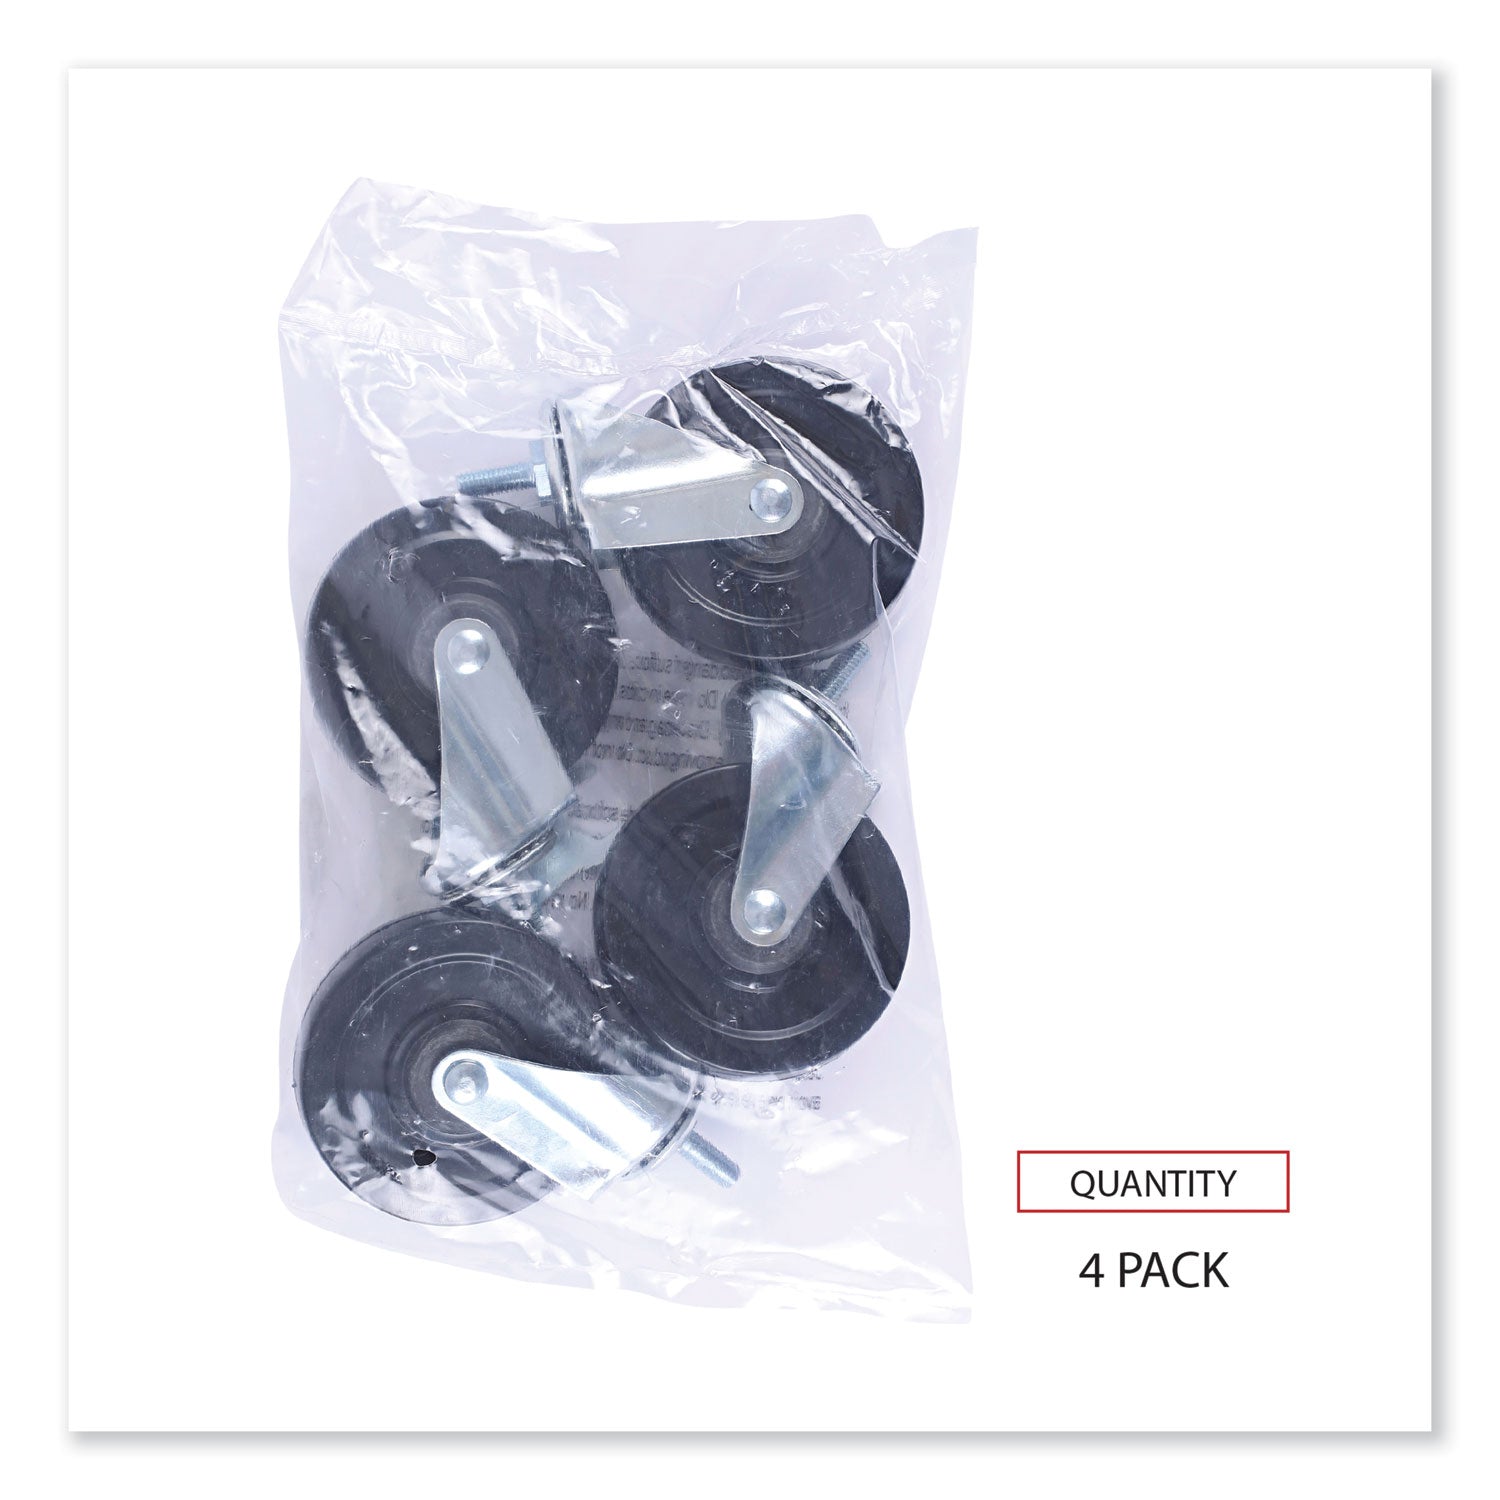 optional-casters-for-wire-shelving-grip-ring-type-k-stem-4-wheel-black-silver-4-set-2-locking_alesw690004 - 6